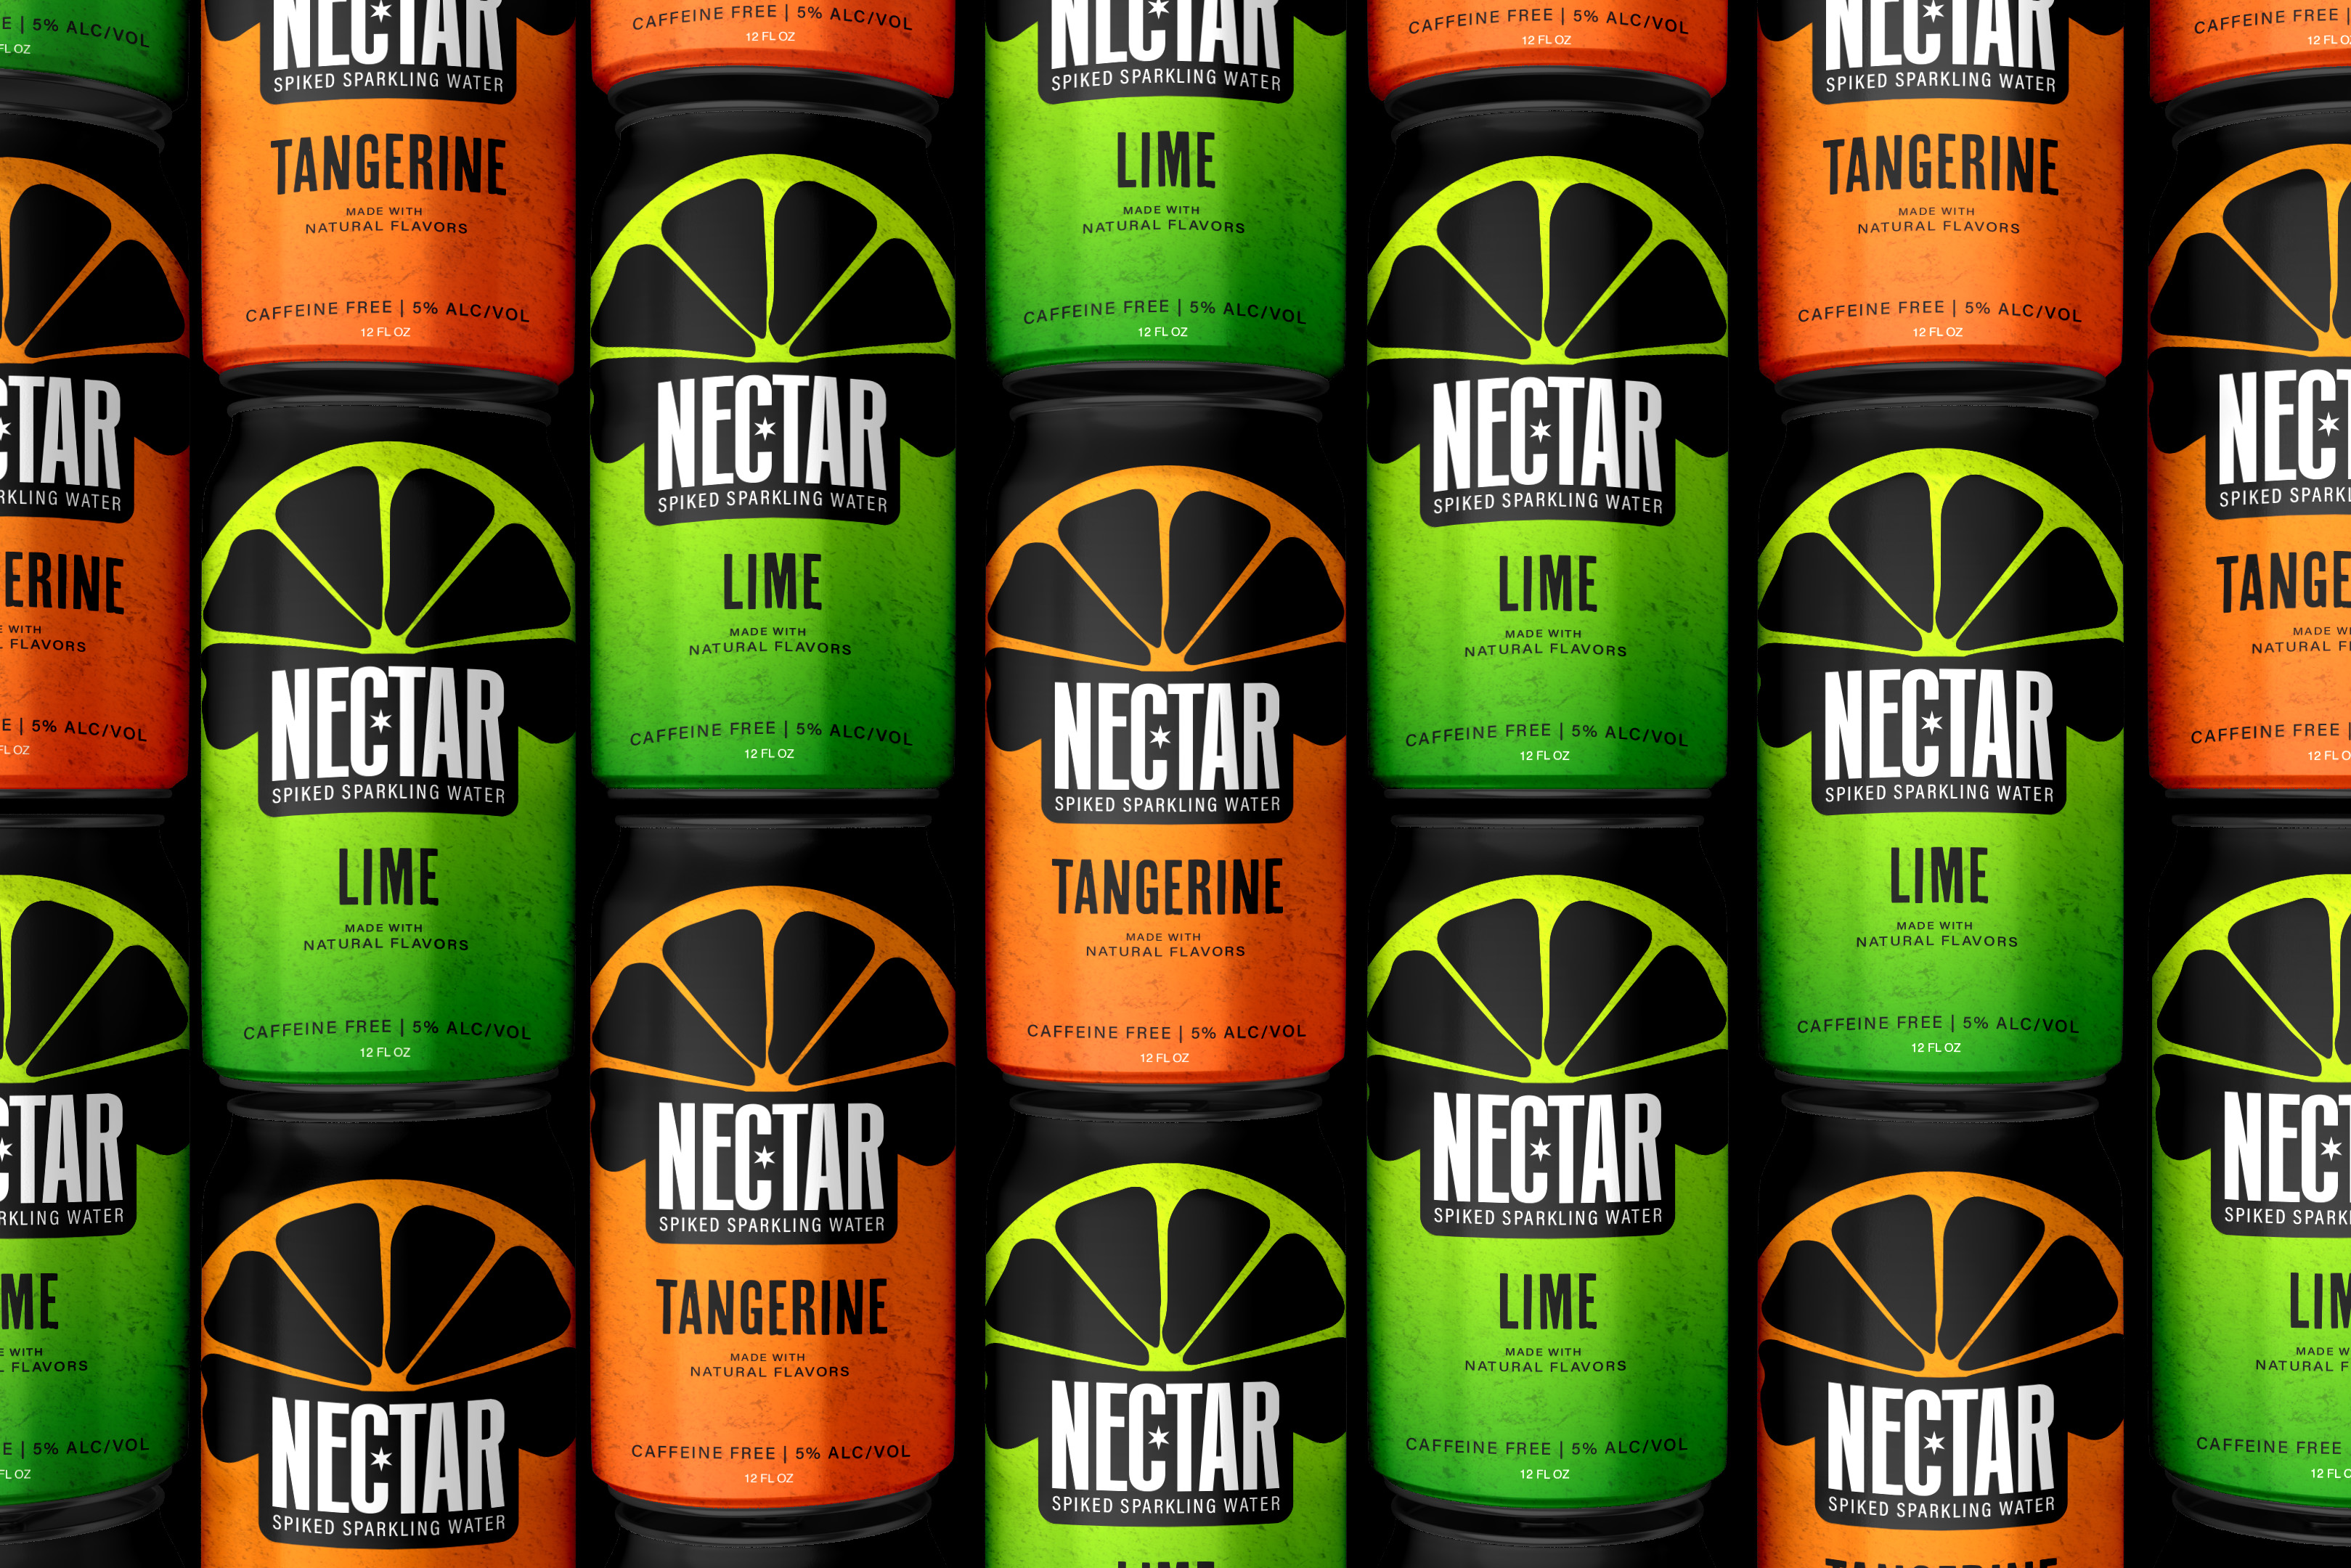 repeating cans of Nectar in a grid